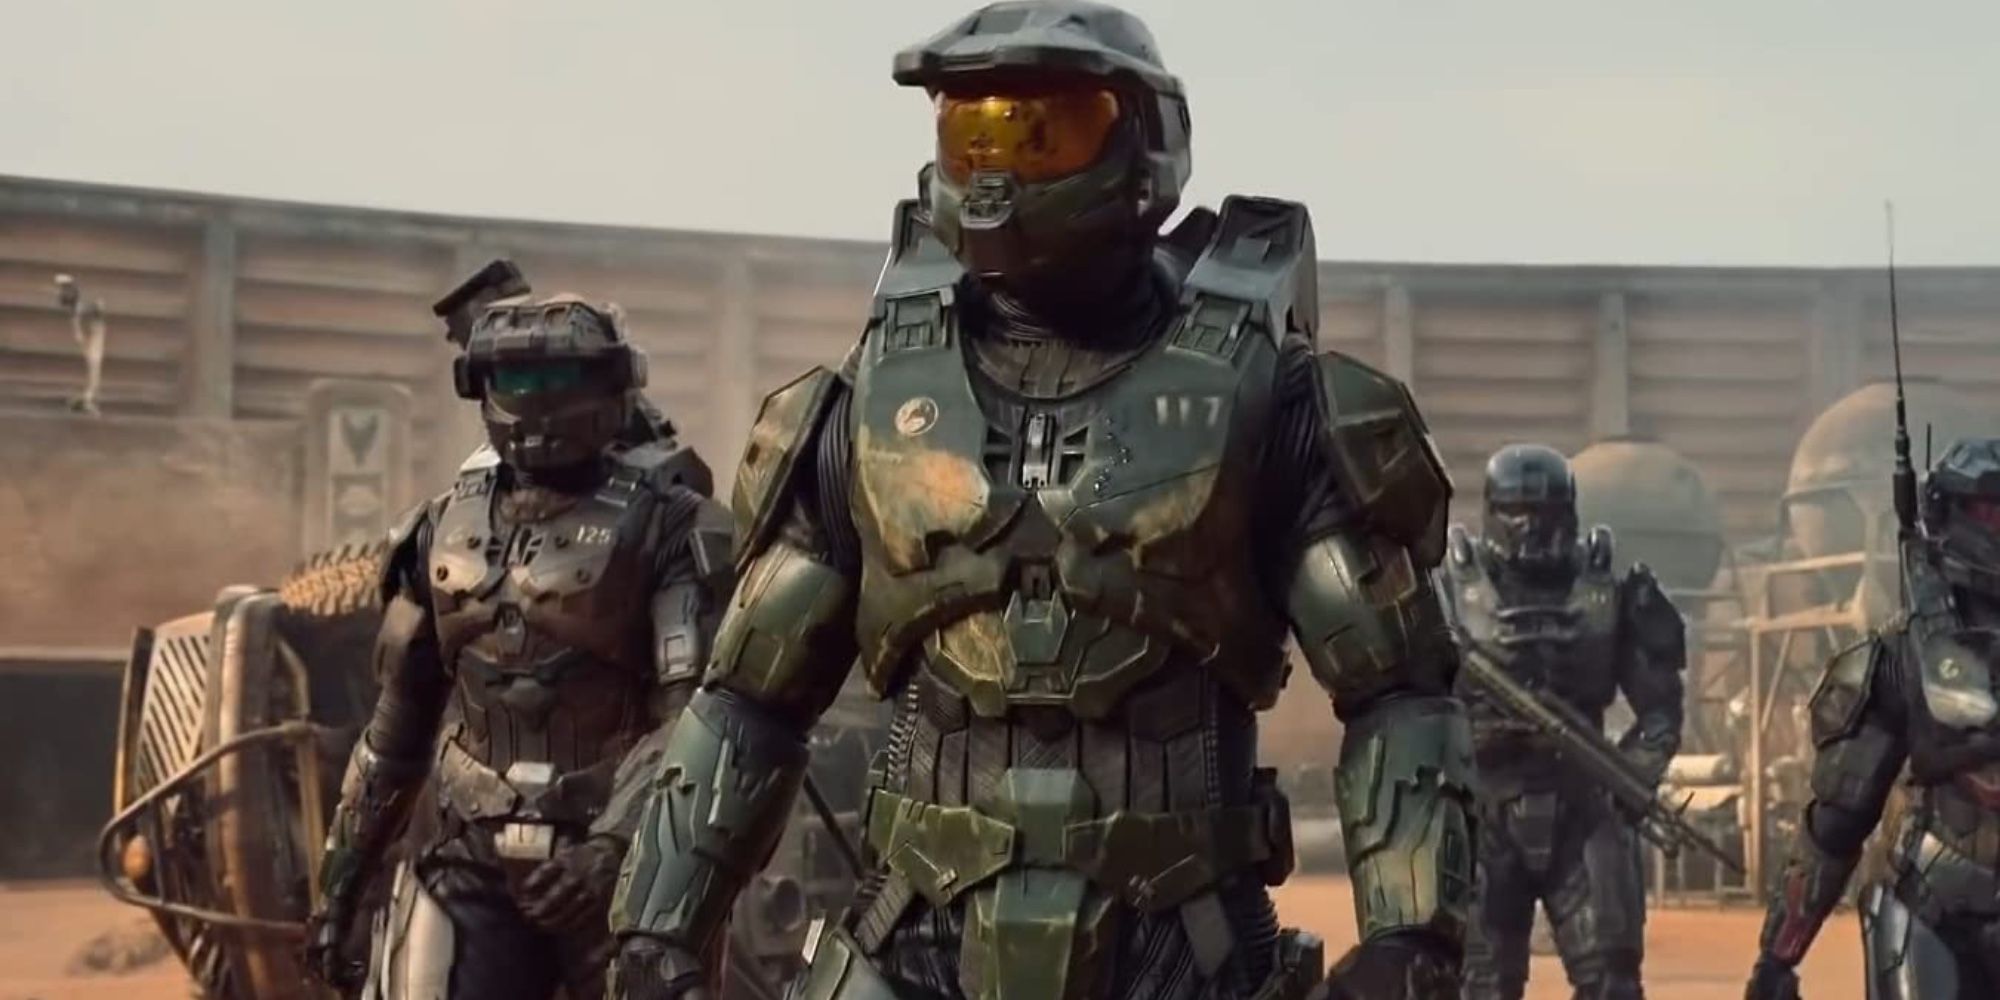 Producer of Halo TV show says series won't satisfy everyone